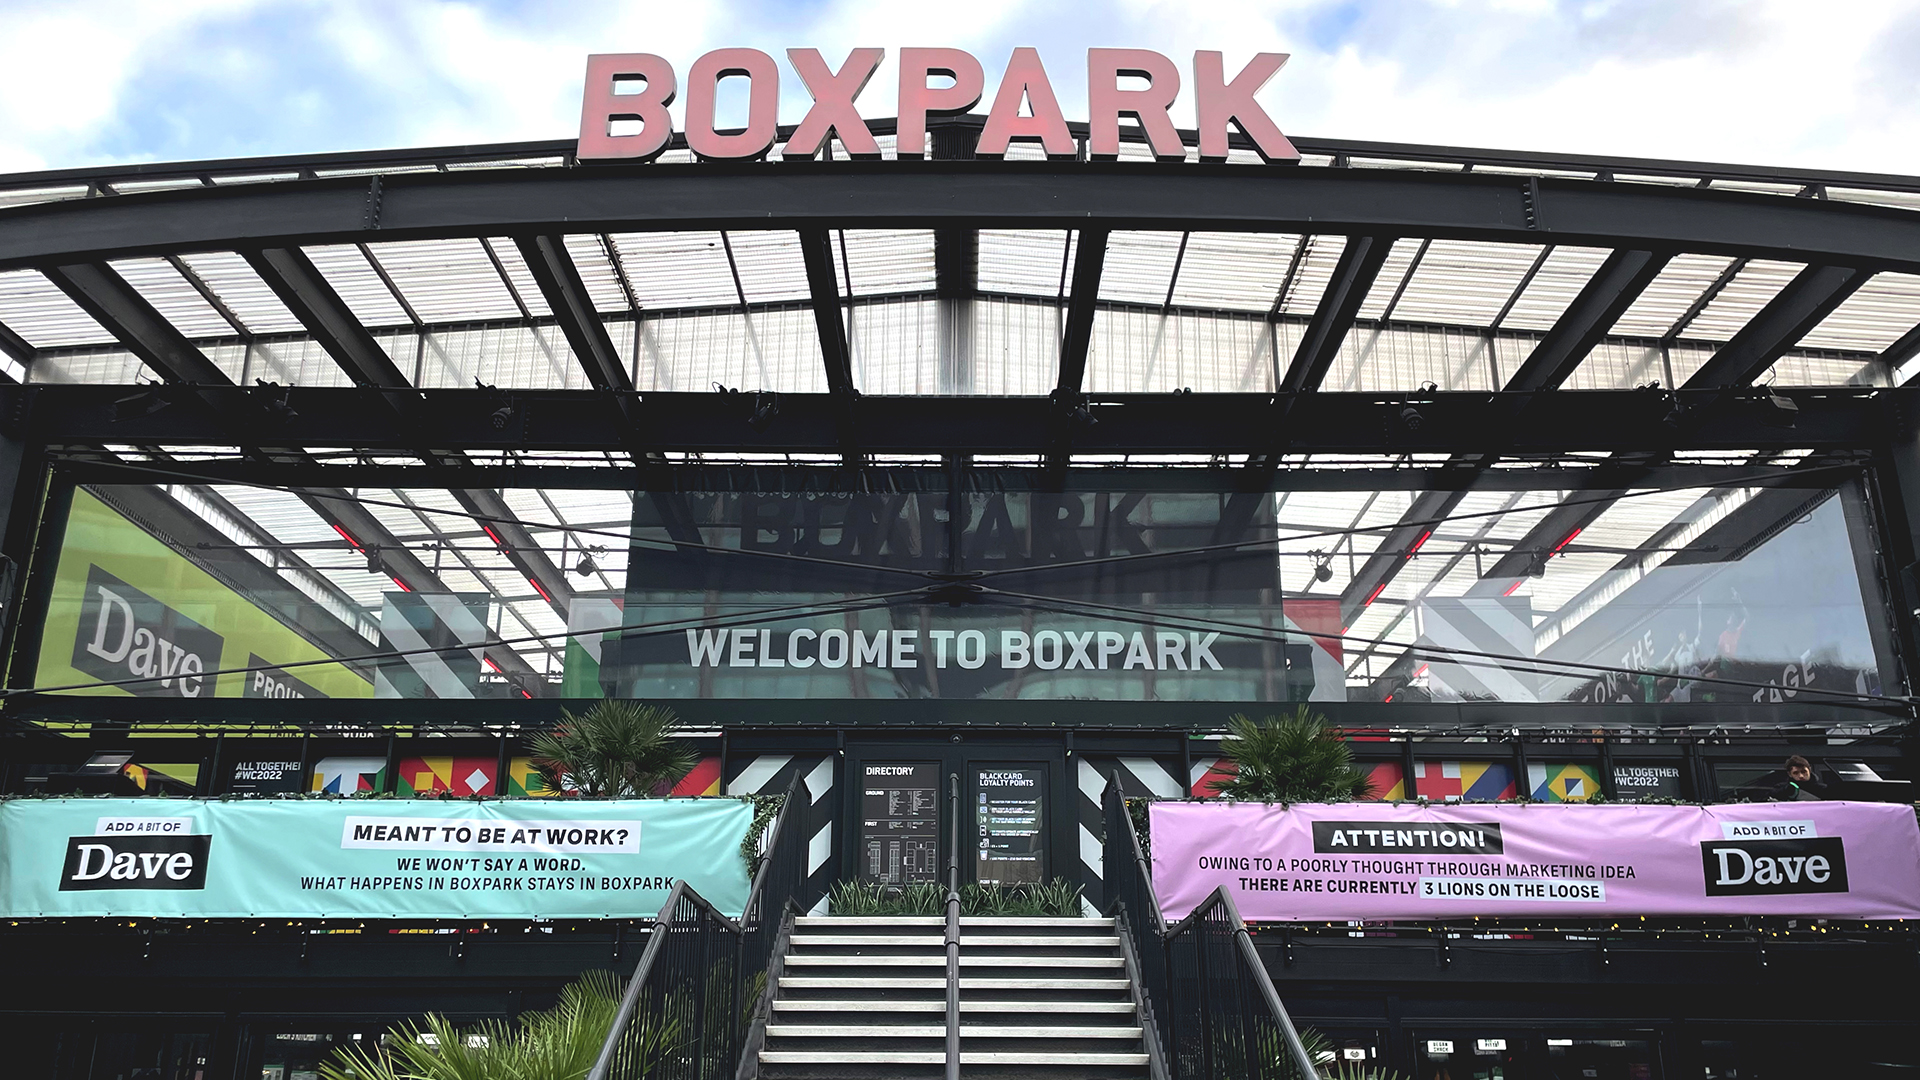 Dave x BoxPark World Cup Takeover